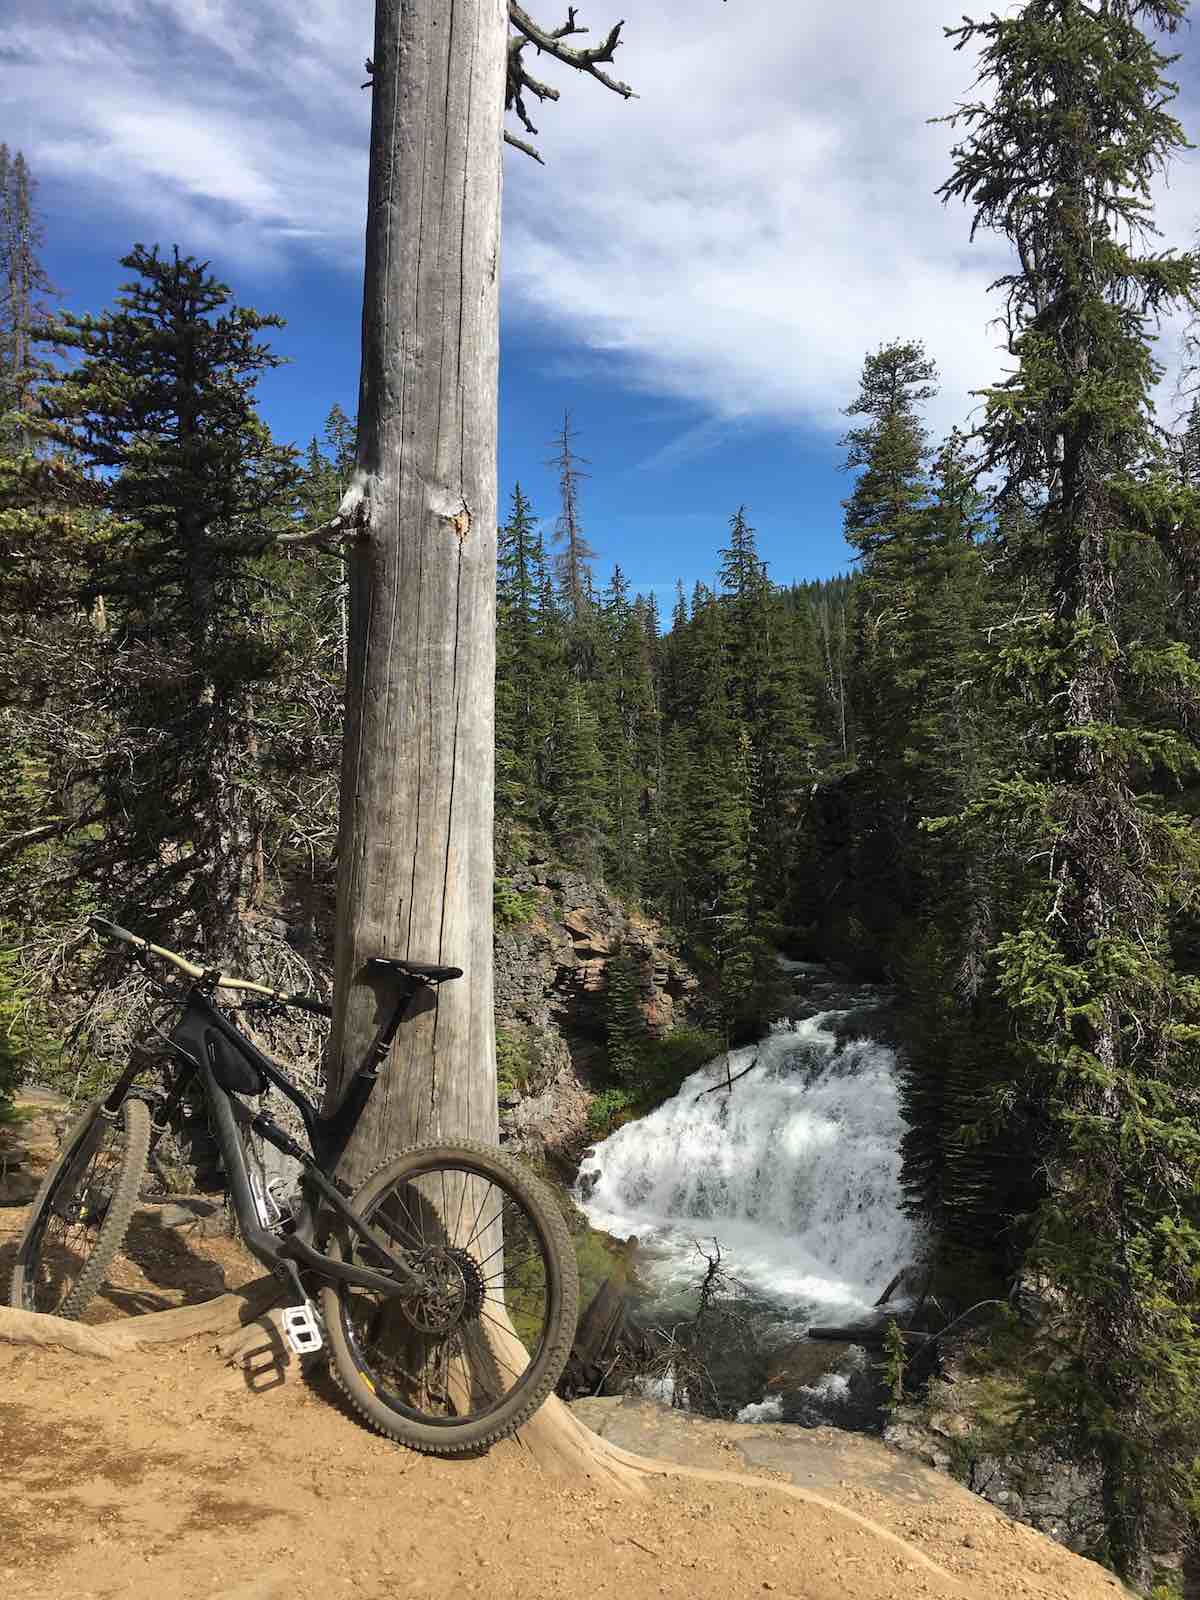 bikerumor pic of the day mountain biking north fork trail oregon near bend bike leaning against tree near a waterfall surrounded by tall evergreen trees